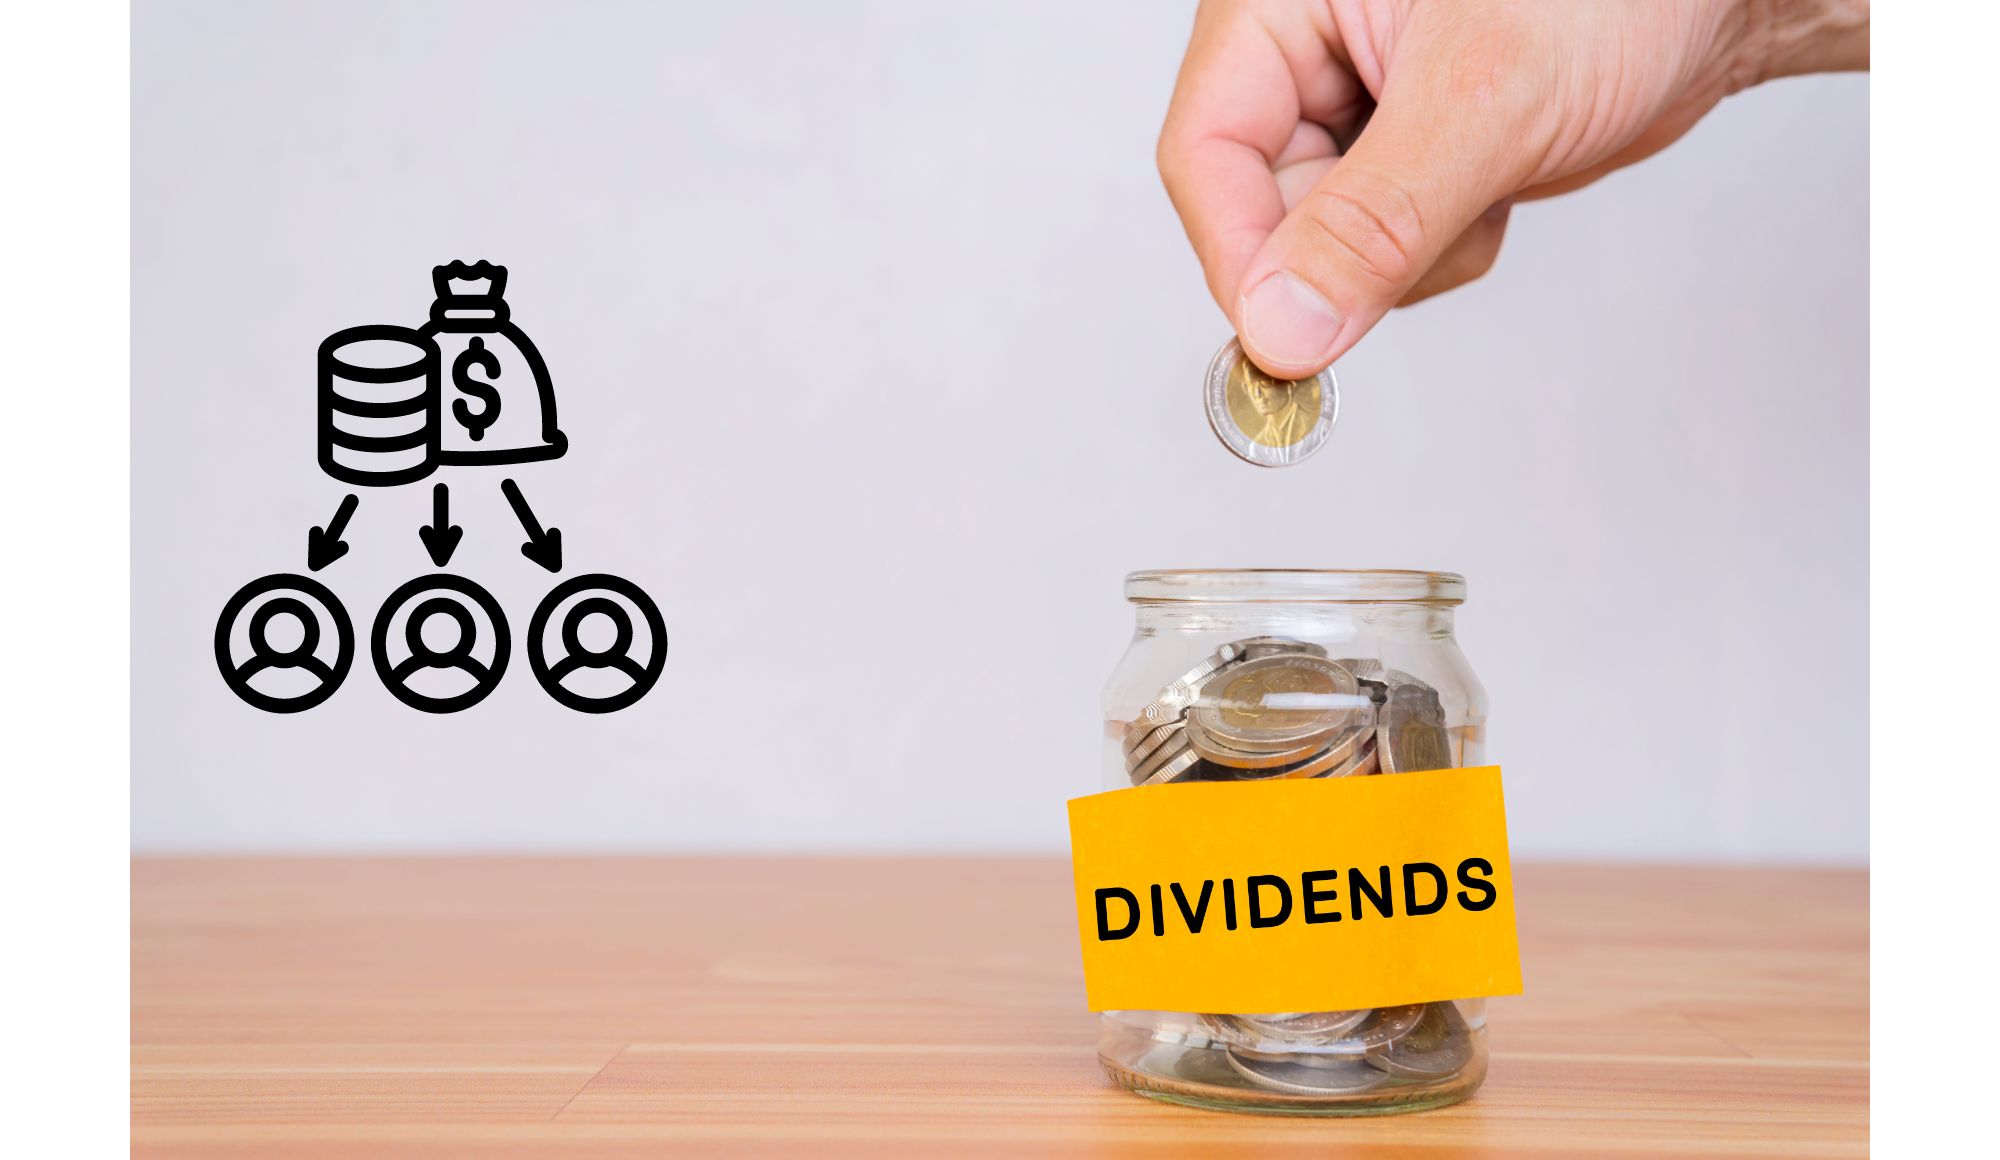 How To Make $84,000 In Dividend Annual Income